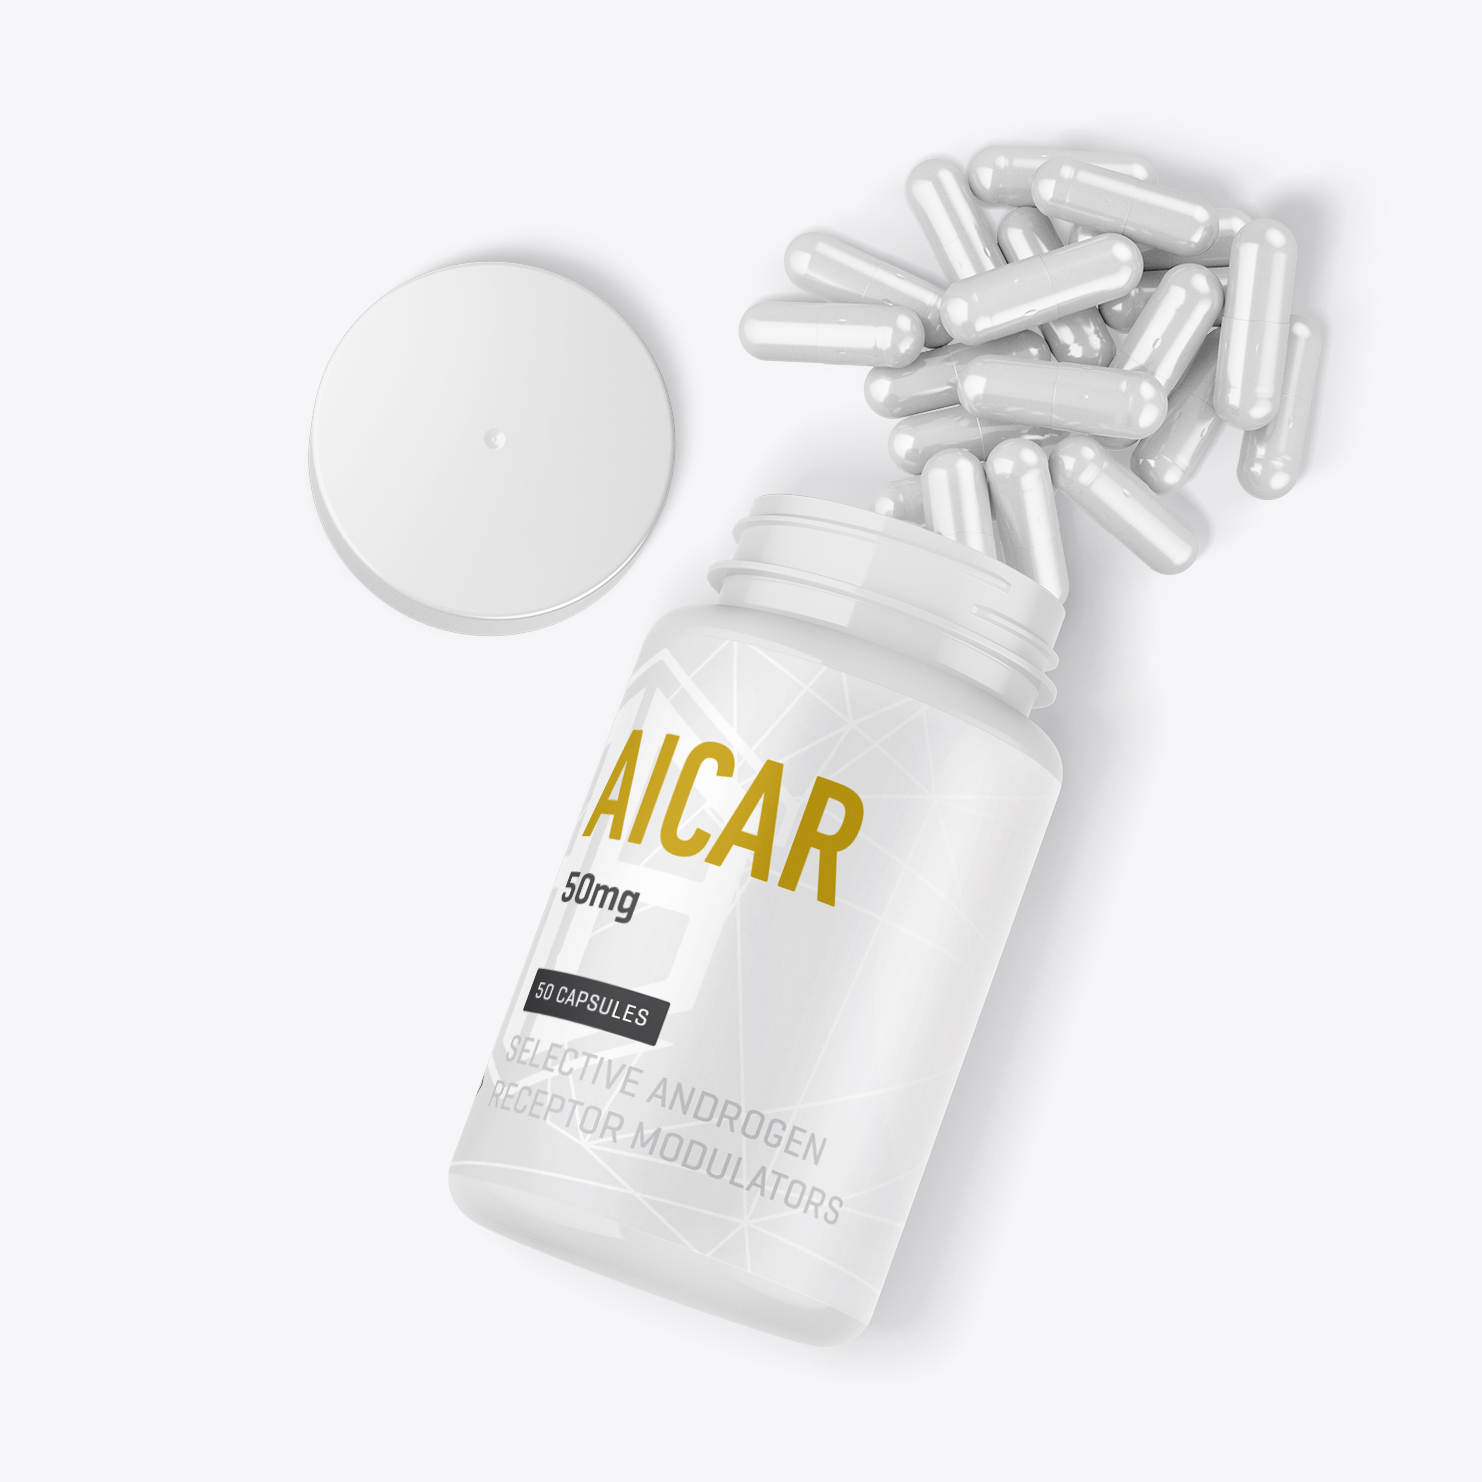 AICAR 50mg Capsules - Opened Bottle of AICAR with 50 capsules of 50mg